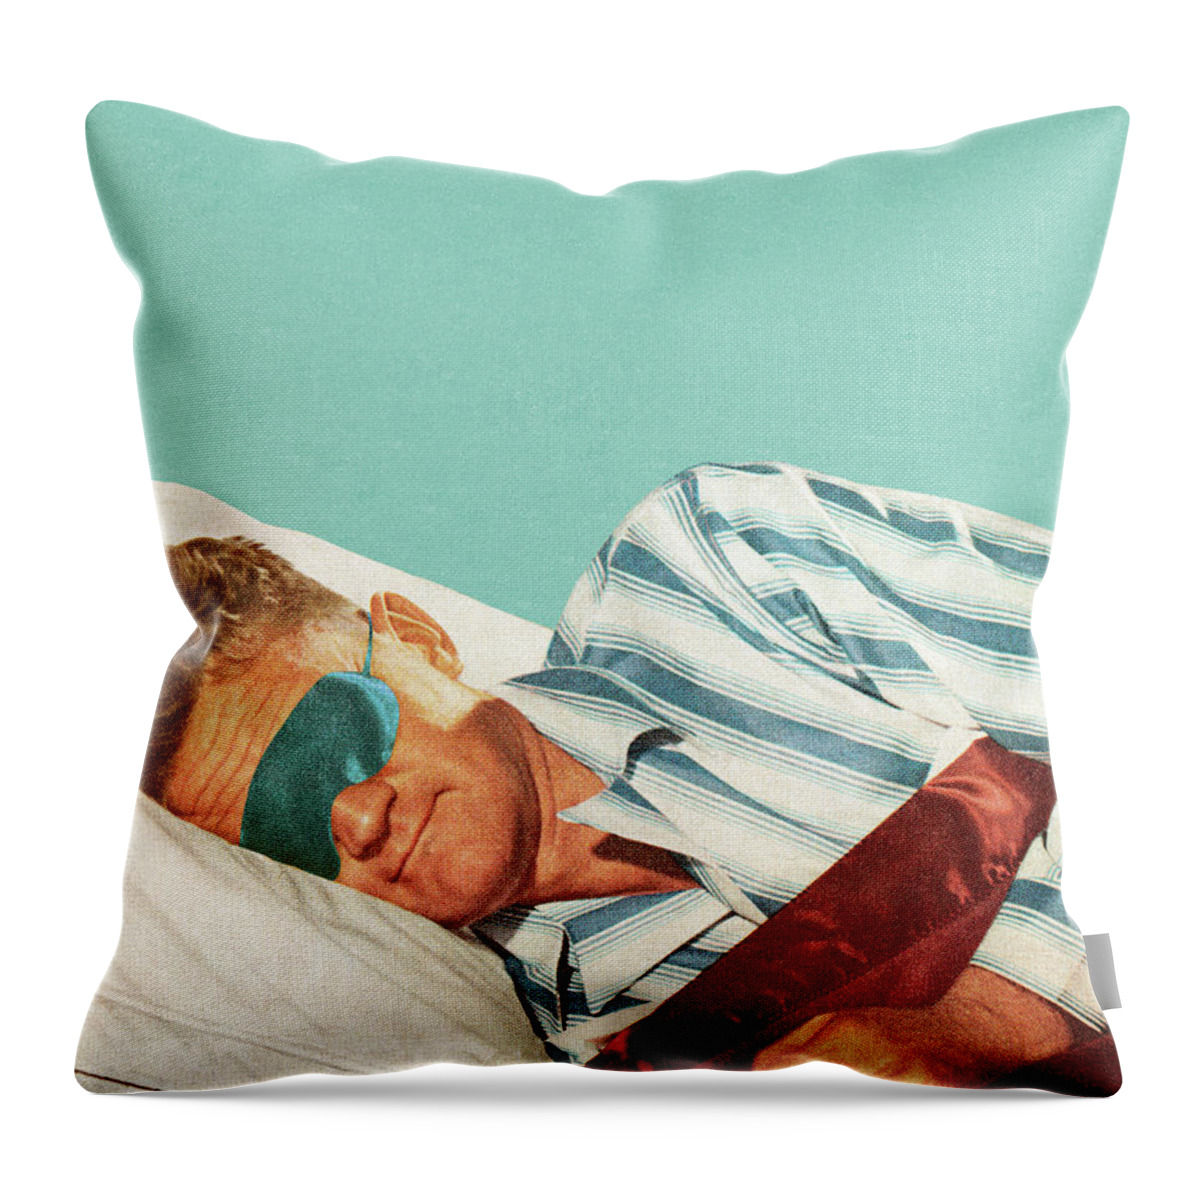 Adult Throw Pillow featuring the drawing Sleeping Man Wearing Eye Mask by CSA Images